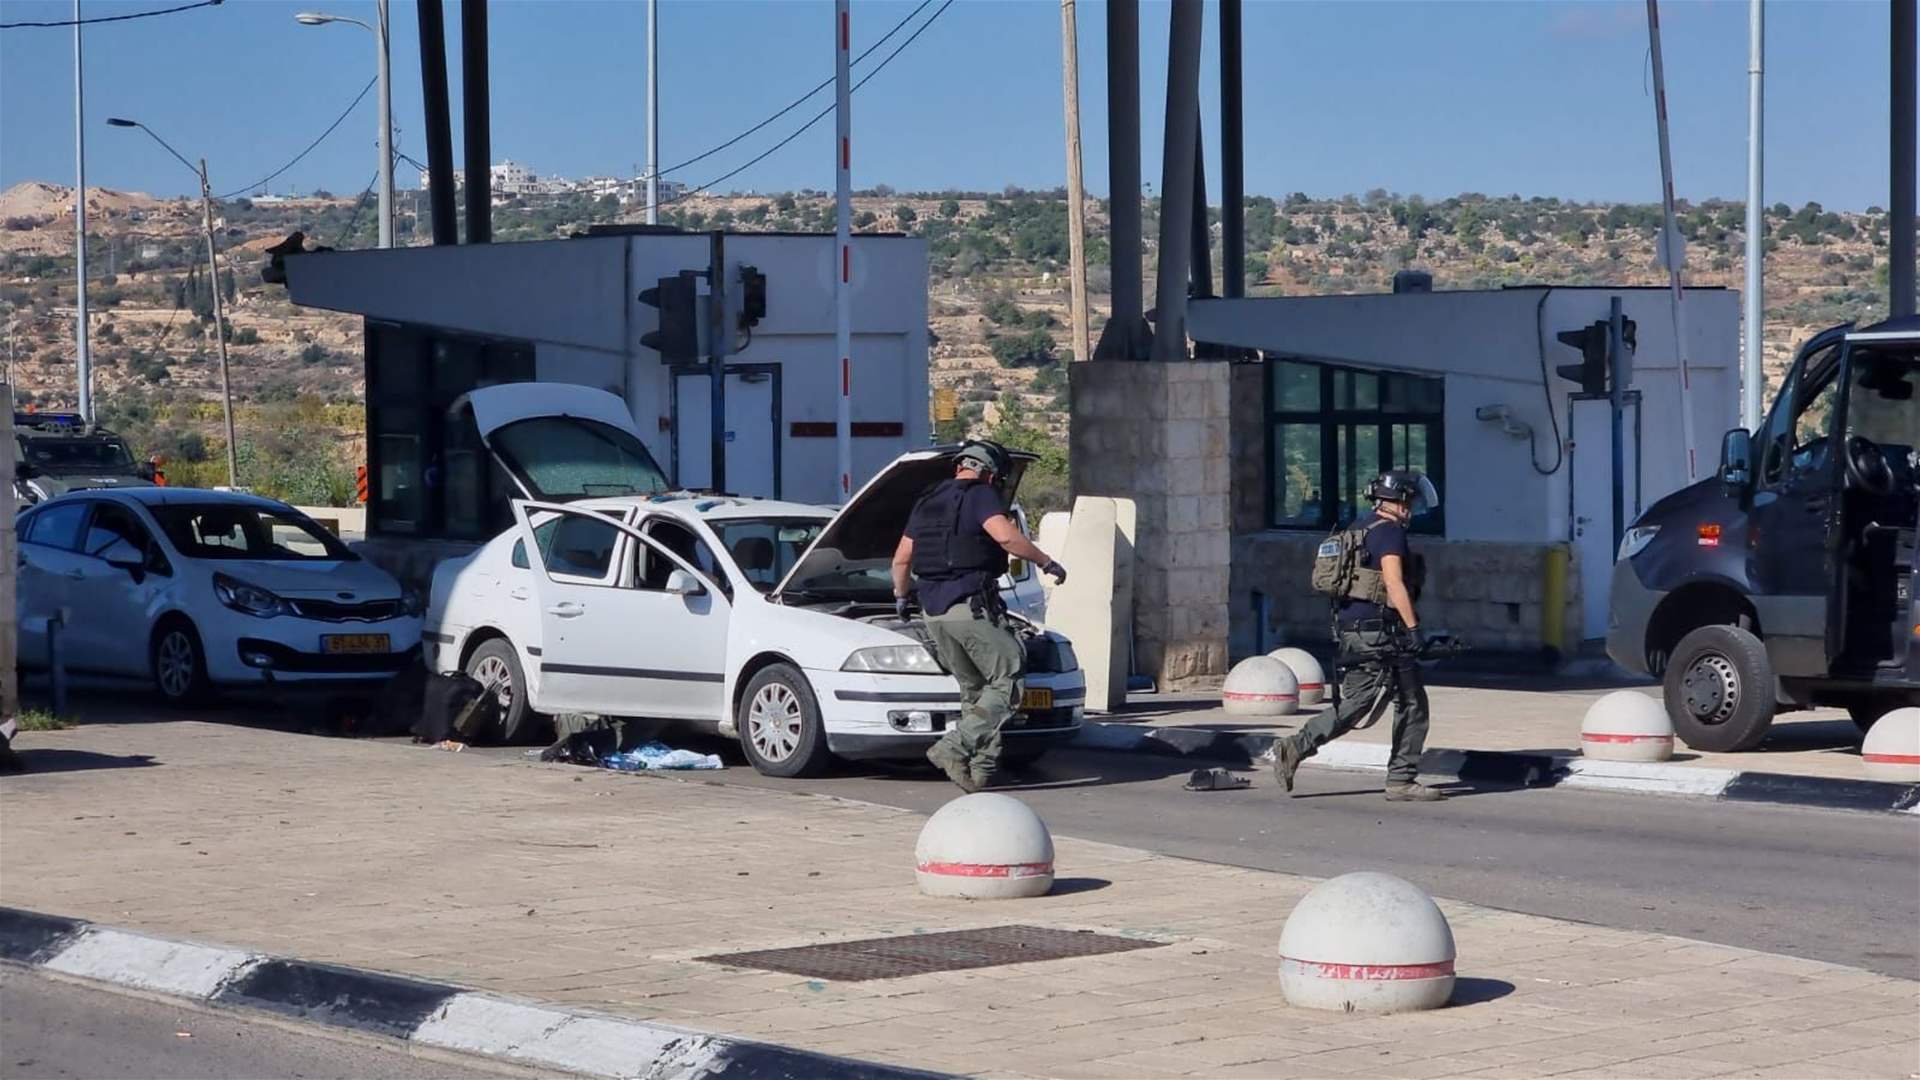 Several injured among Israeli security forces in an attack near Jerusalem